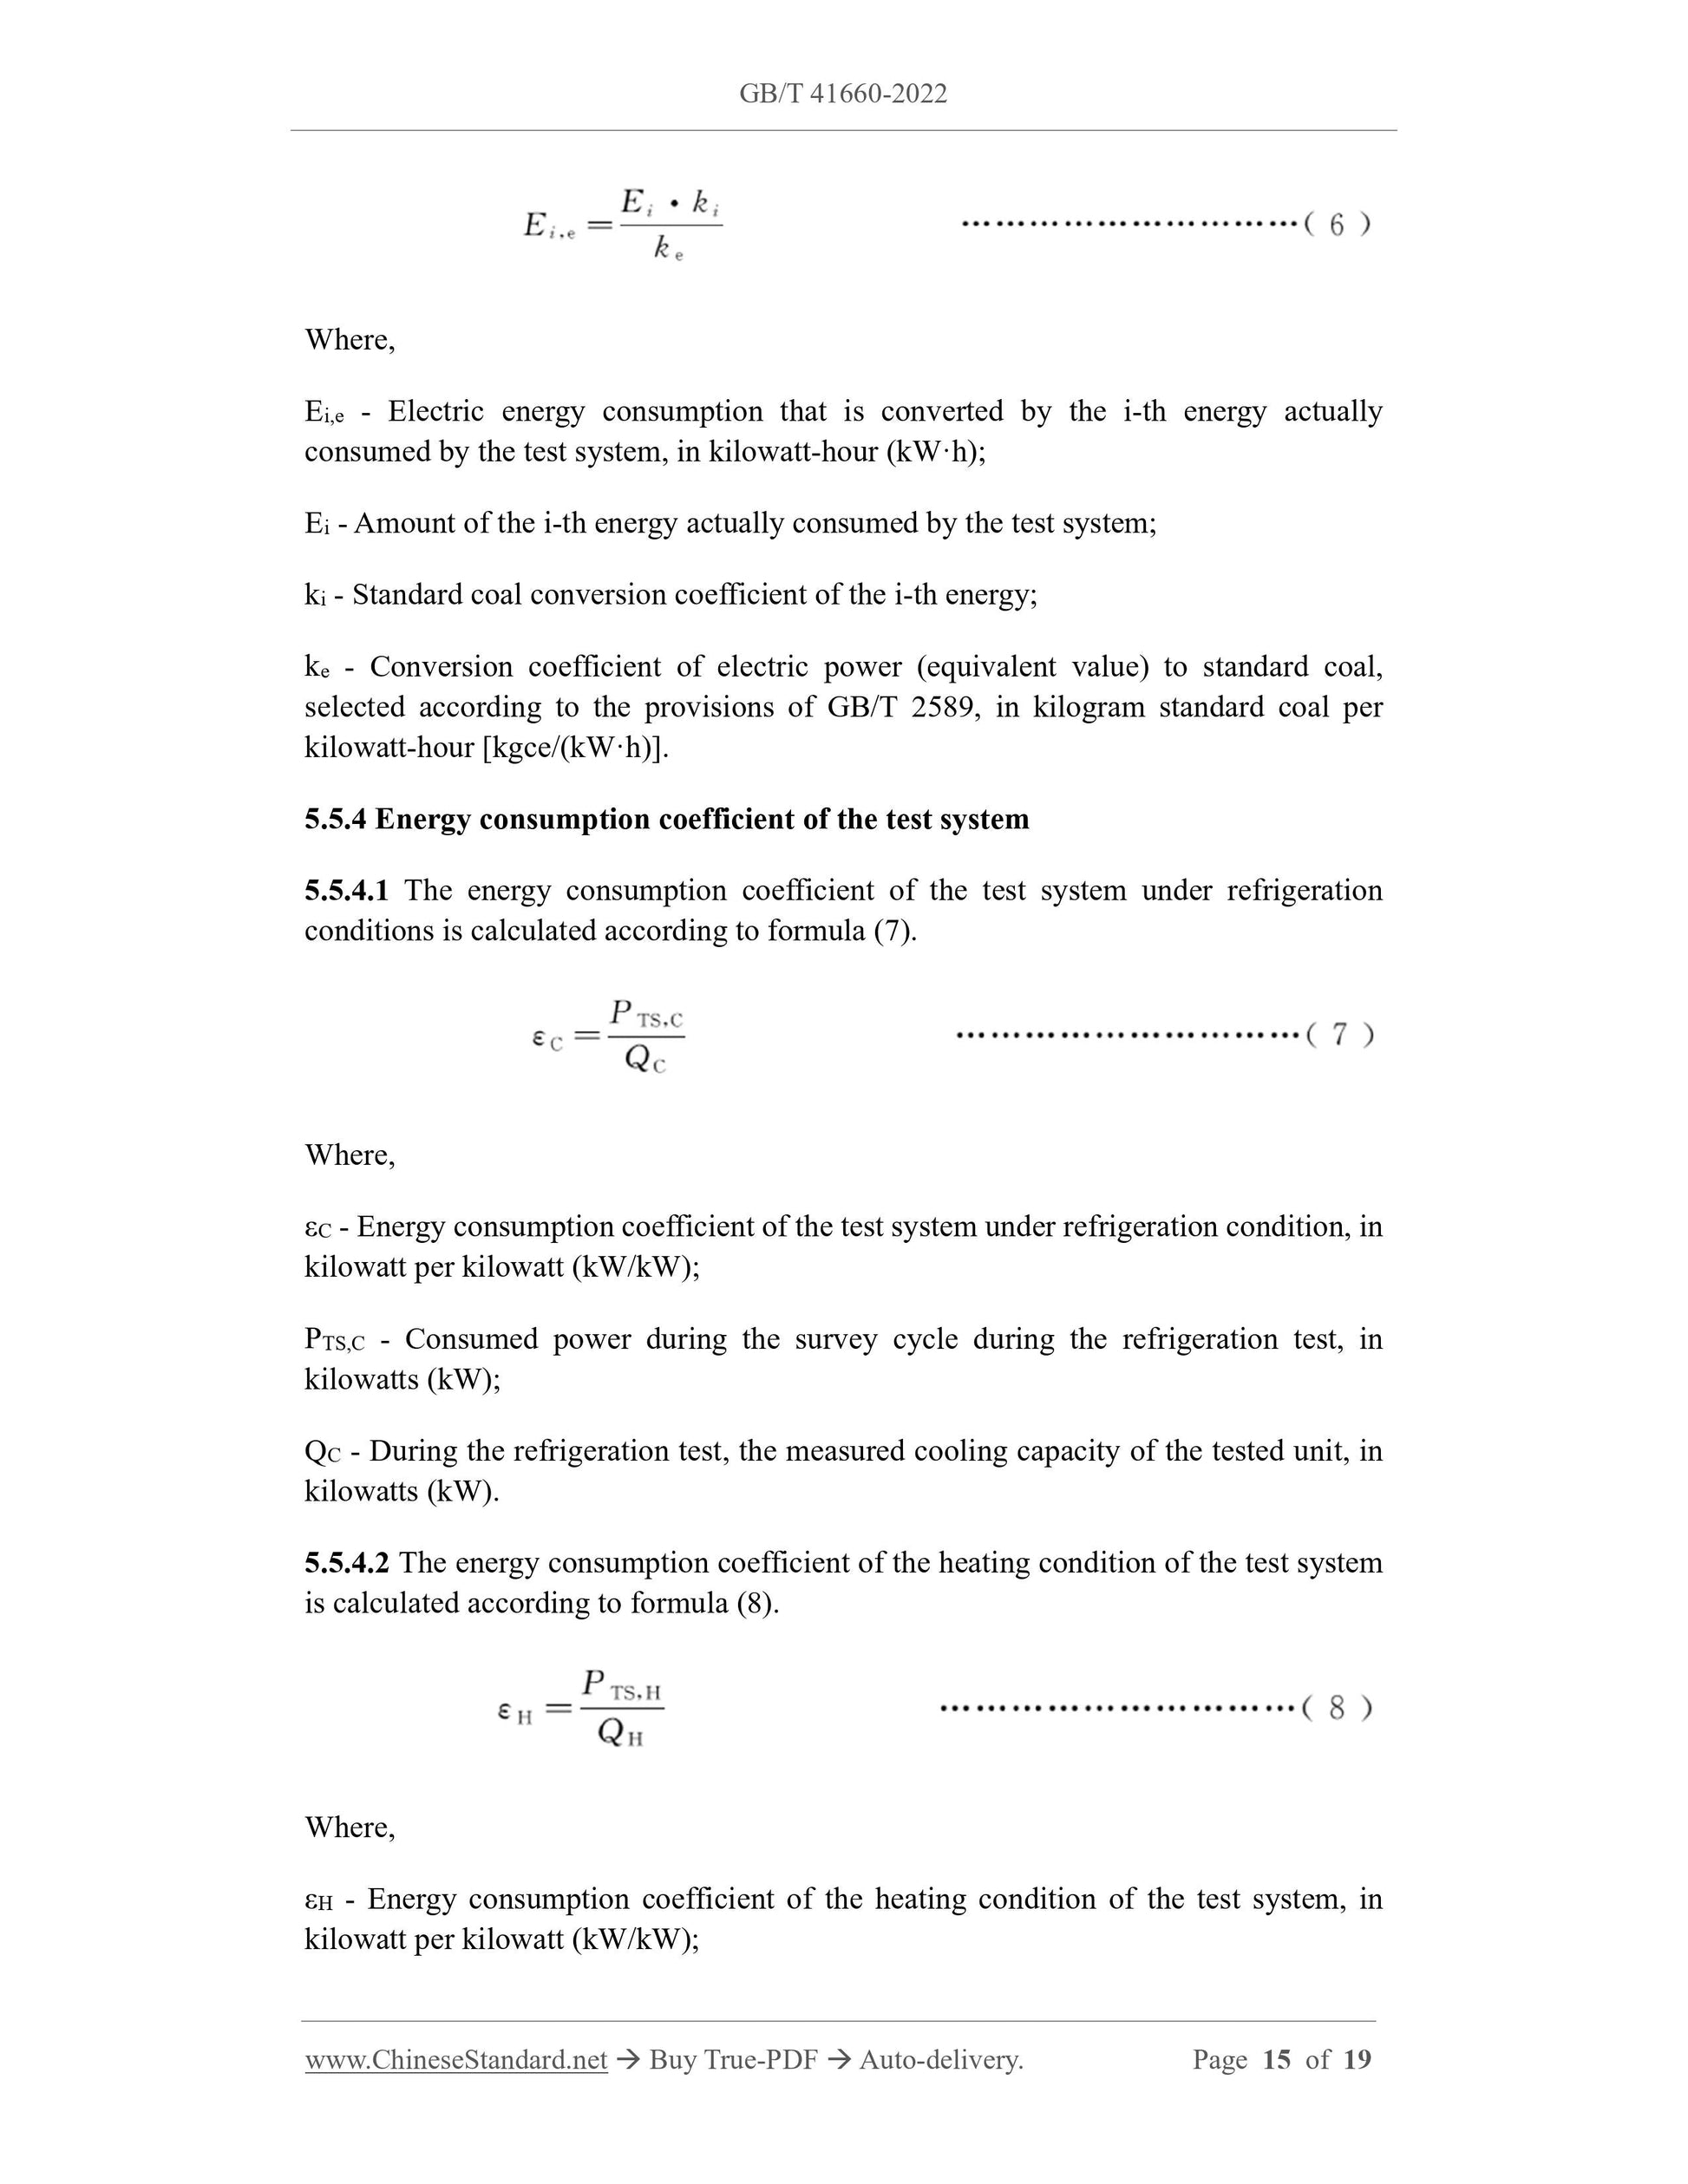 GB/T 41660-2022 Page 9